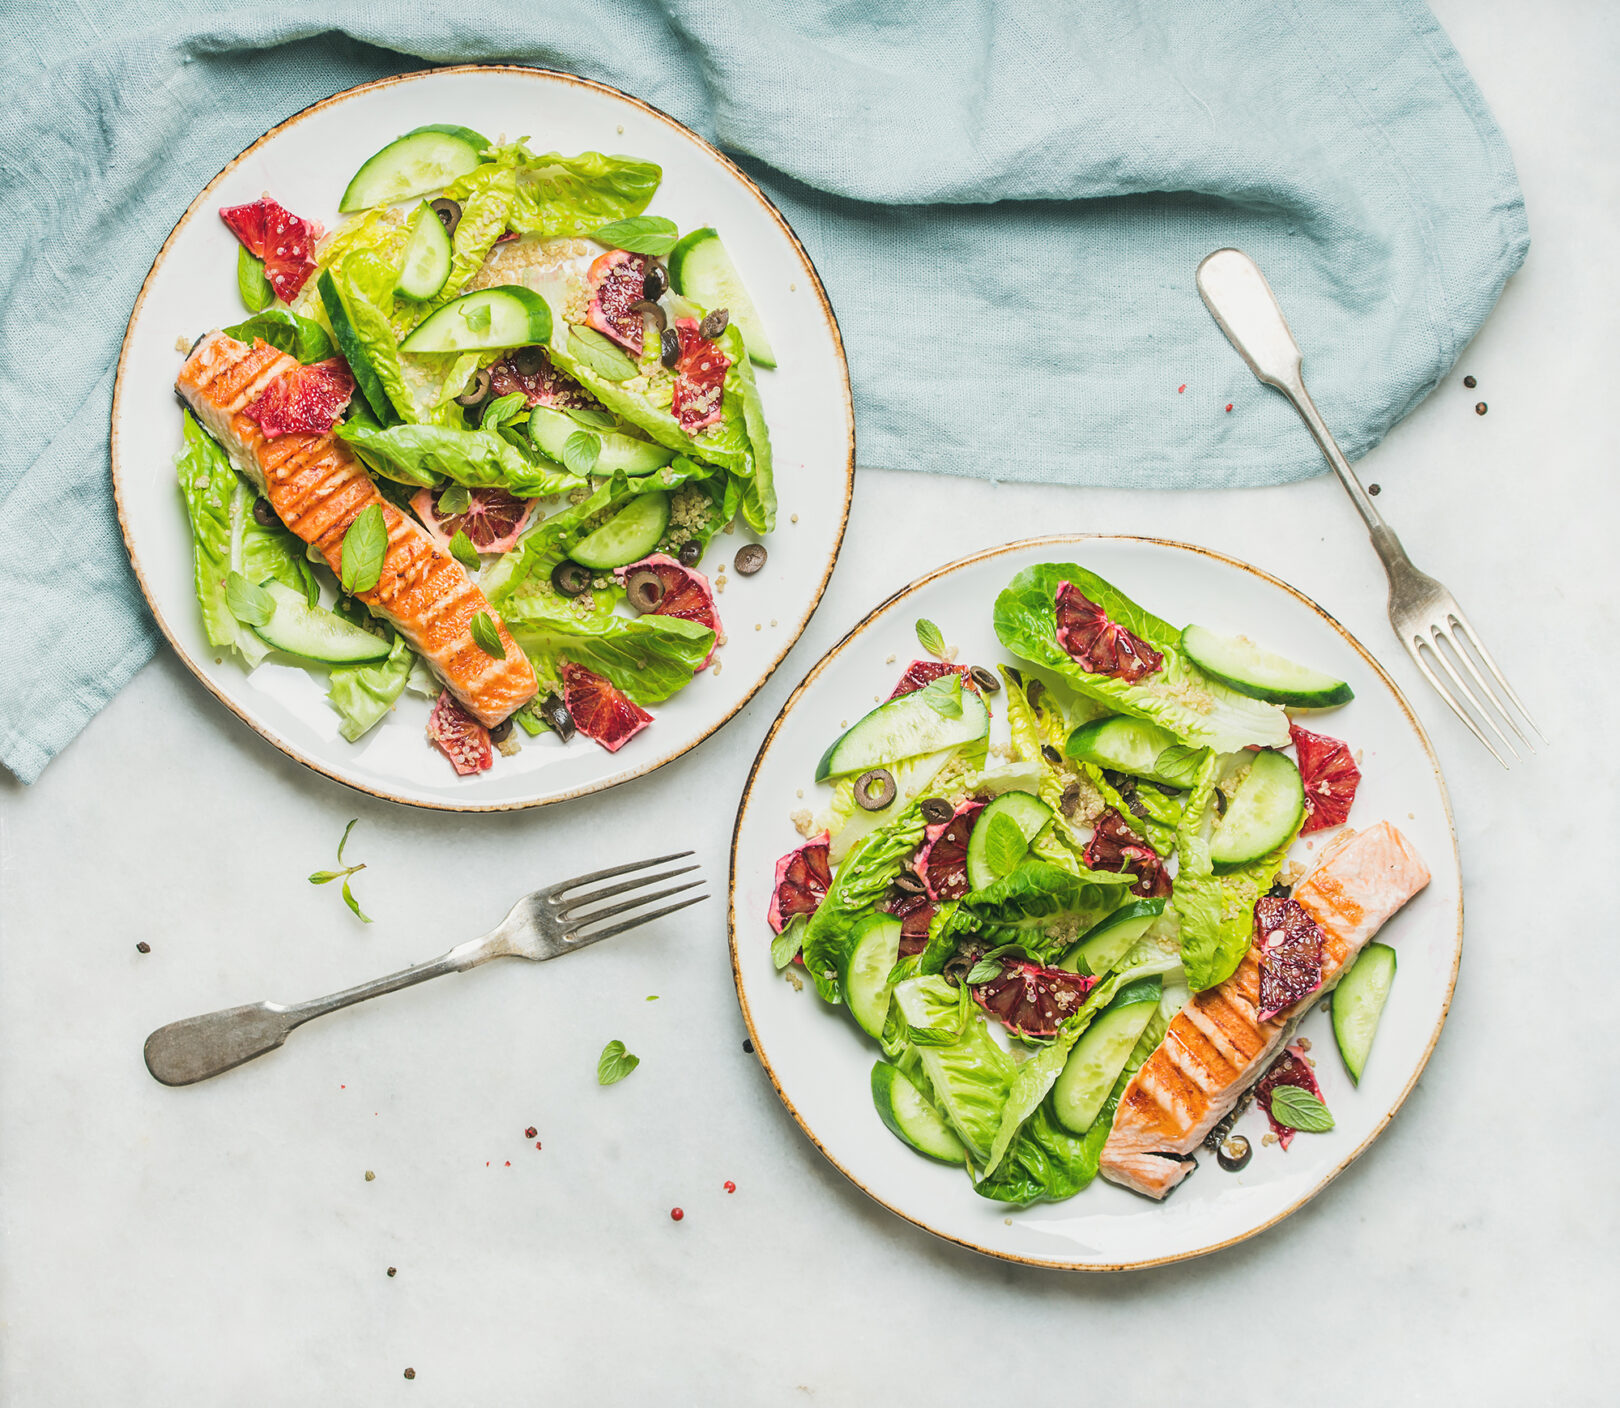 Slow-Roasted Salmon with Minted Cucumbers